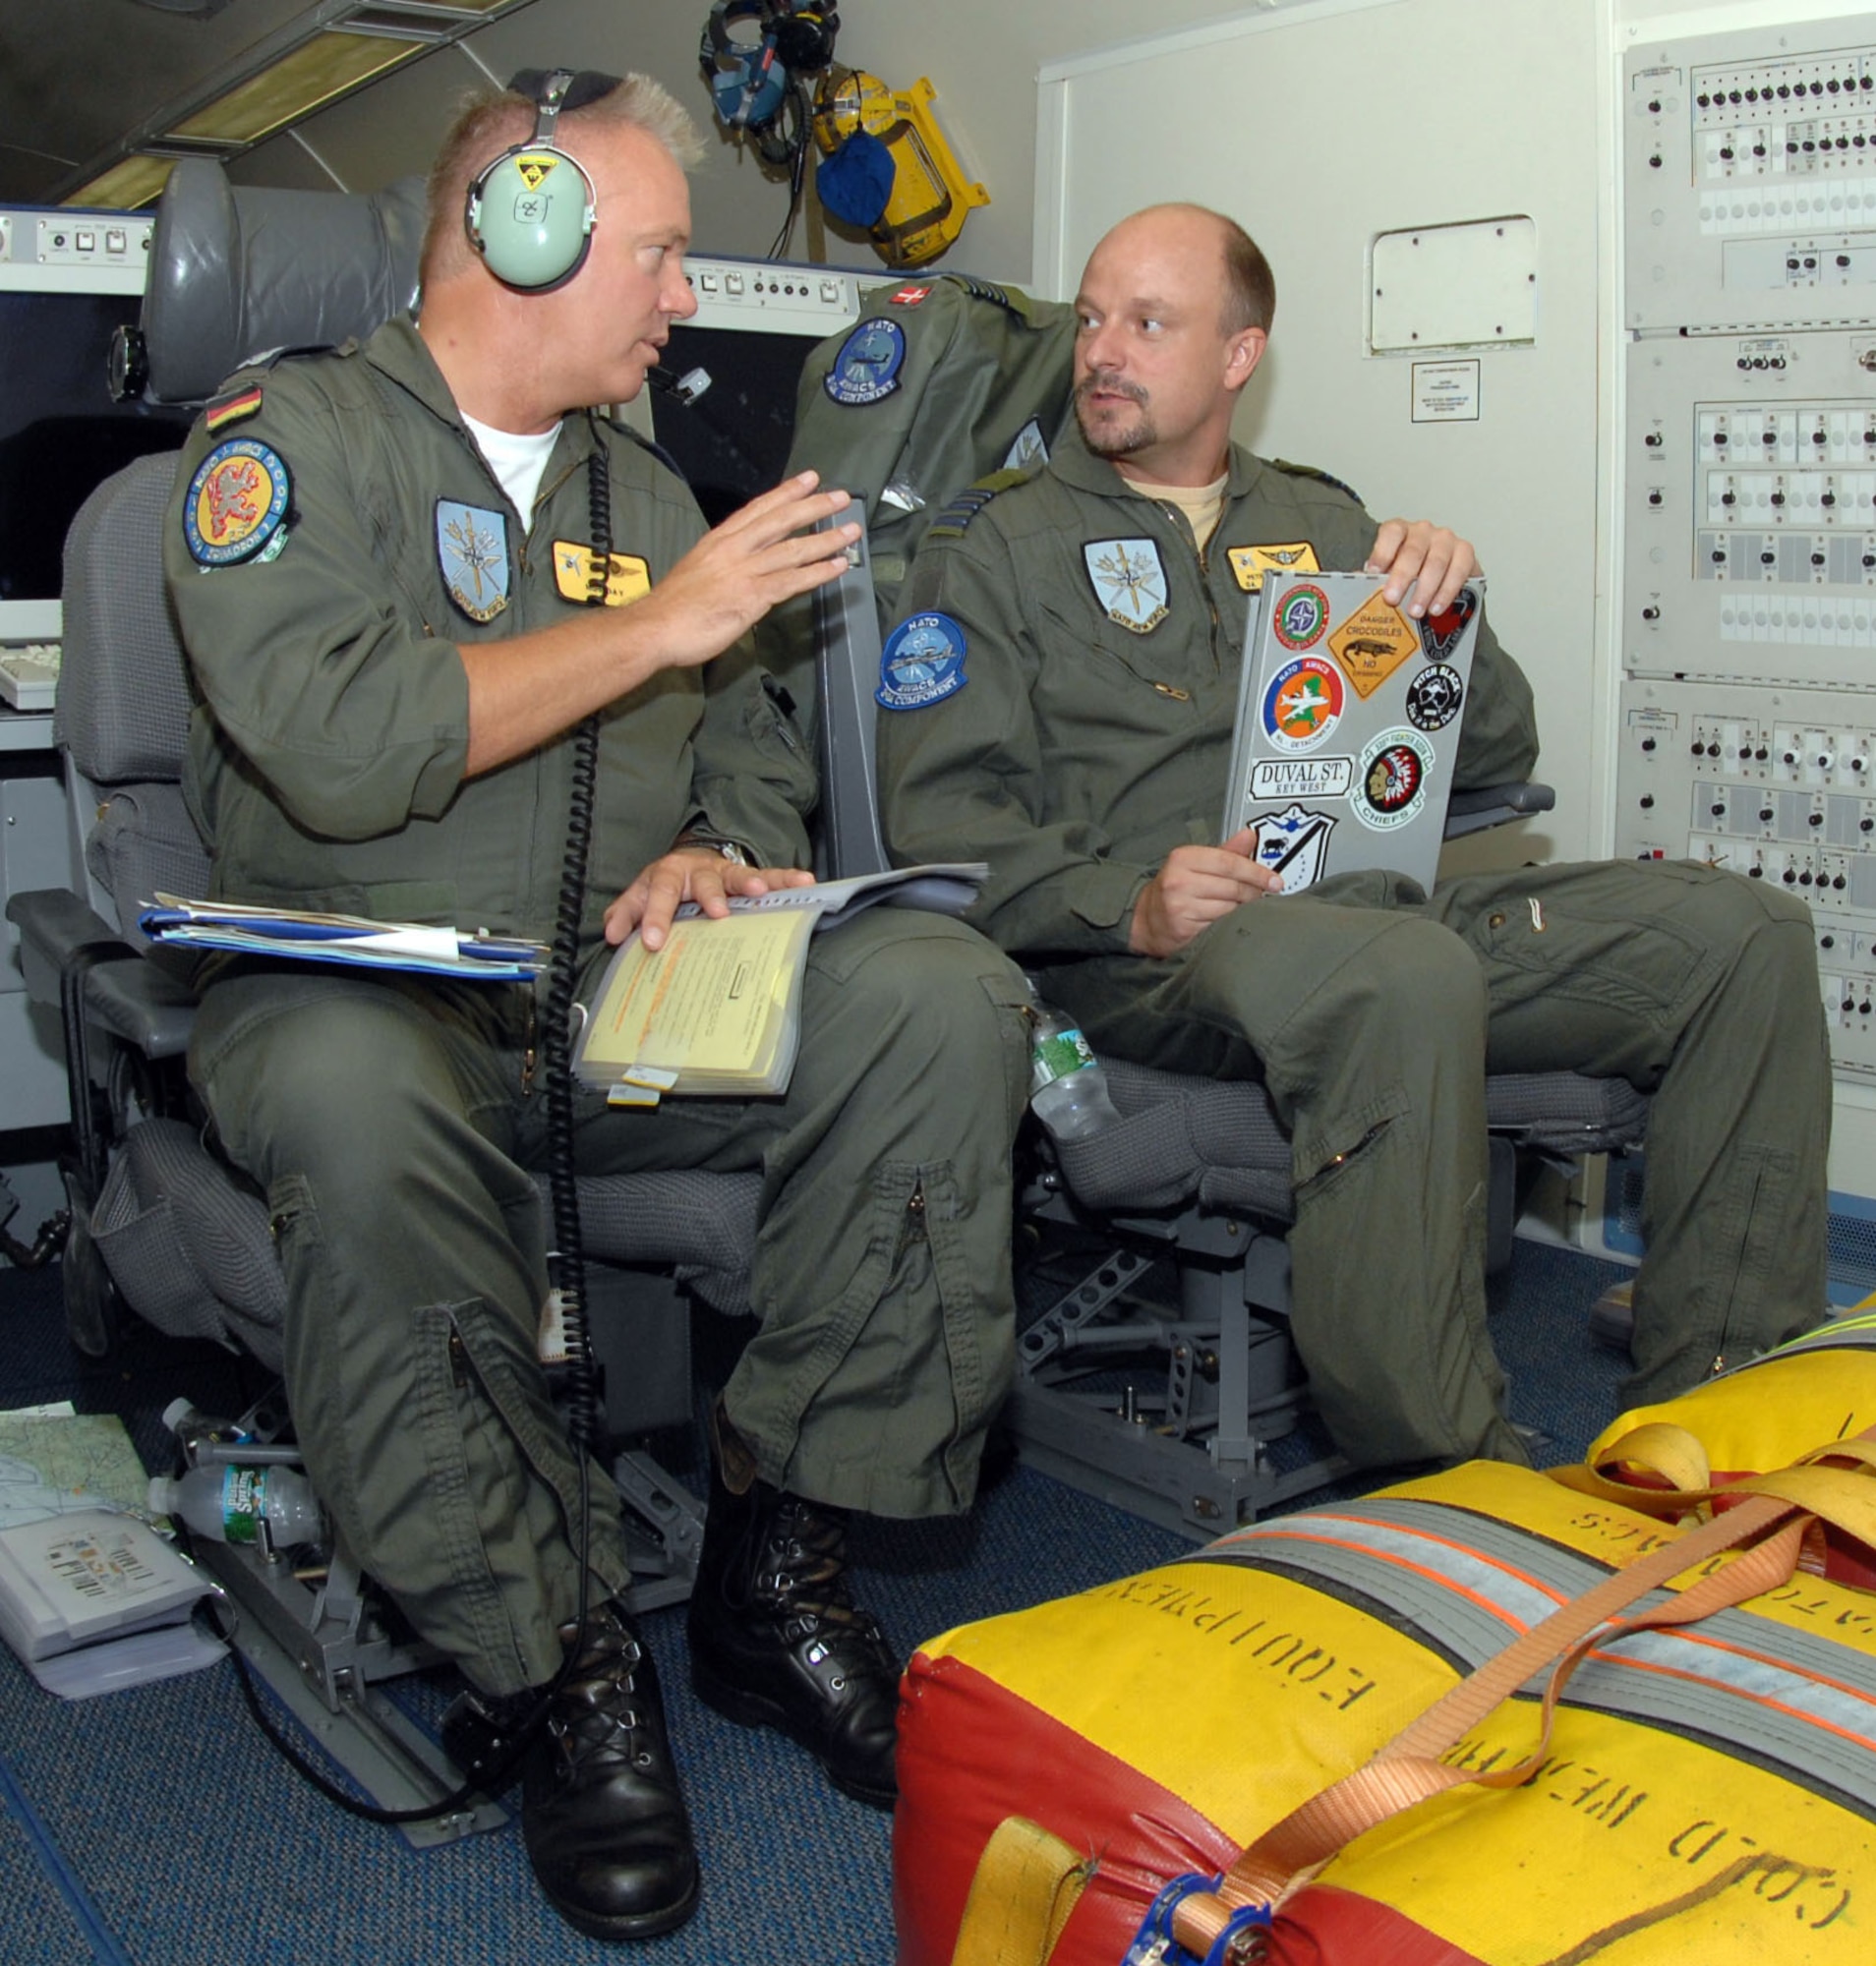 German Lt. Col. Raimond Schulz and Danish Maj. Peter Boersting, tactical directors, discuss pre-flight procedures on a E-3A Sentinel, an airborne warning and control systems aircraft from Geilenkirchen North Atlantic Treaty Organization Air Base, Germany  on August 15, 2008, Seymour Johnson Air Force Base, North Carolina. On the aircraft there are airmen from Turkey, Portugal, United States, Denmark, Germany, Greece and Canada. (U.S. Air Force photo by Airman 1st Class Gino Reyes)